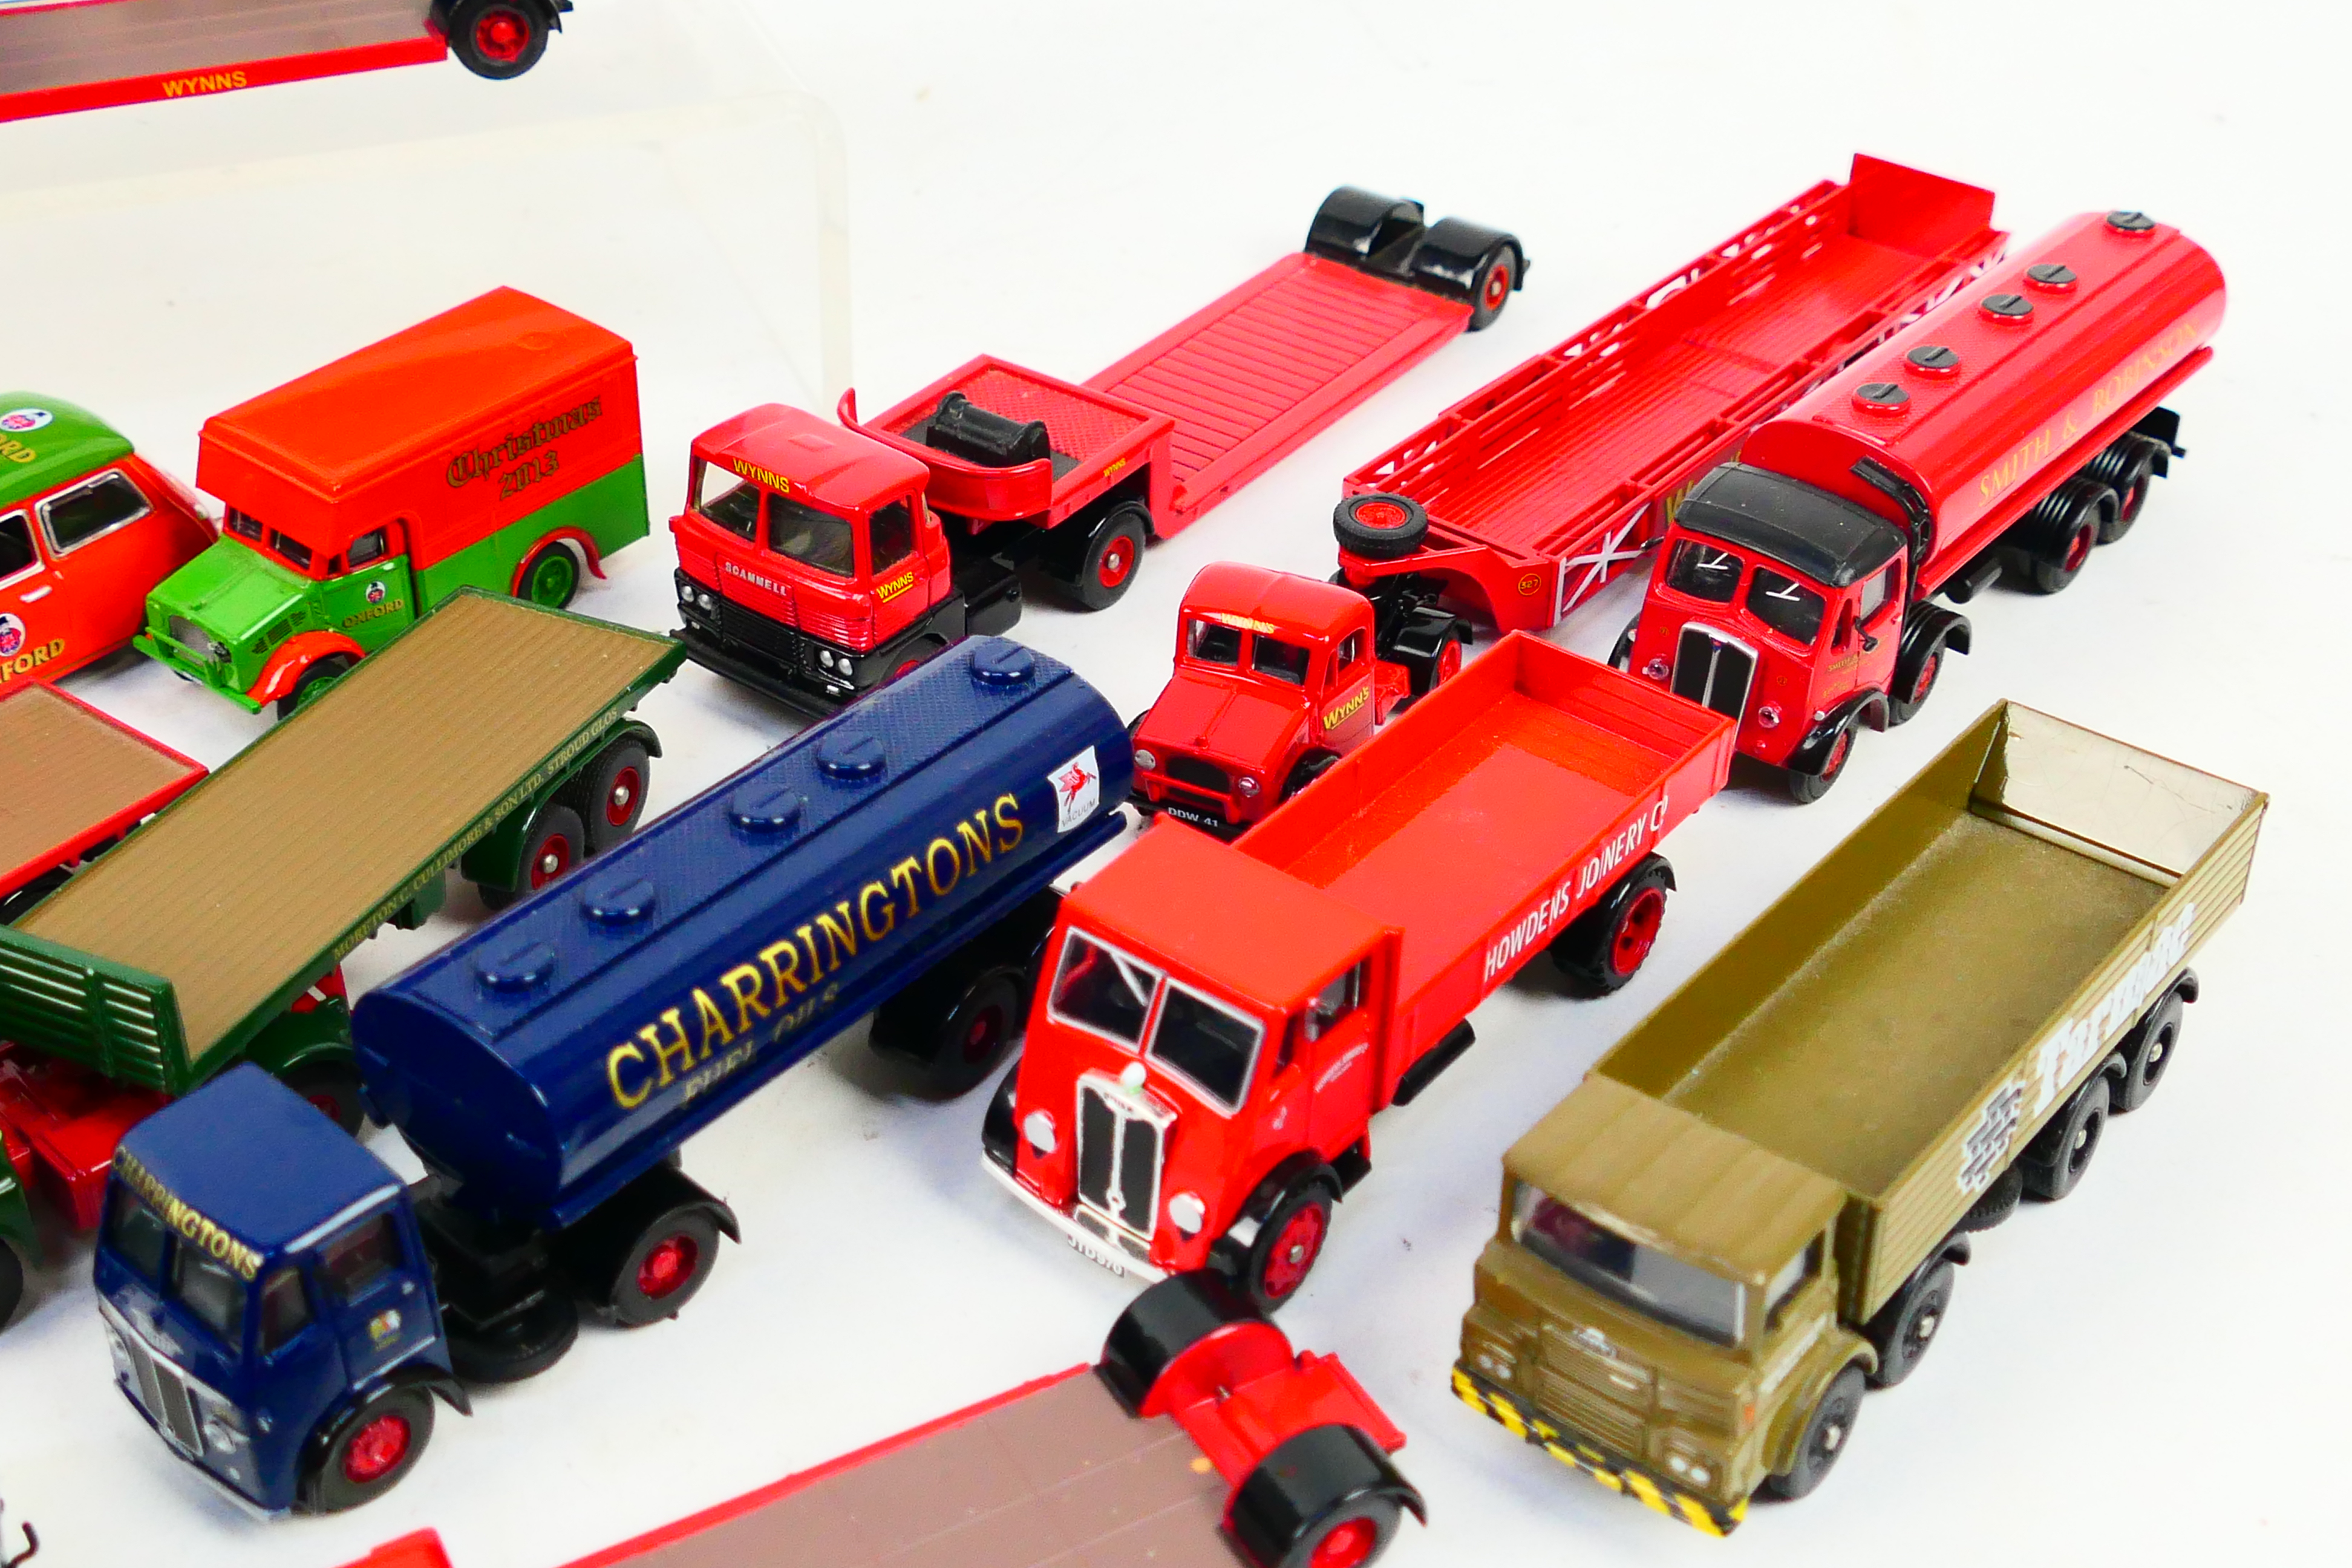 Oxford Diecast - Classix - Corgi - Lledo - Approximately 30 diecast model vehicles in various - Image 7 of 7